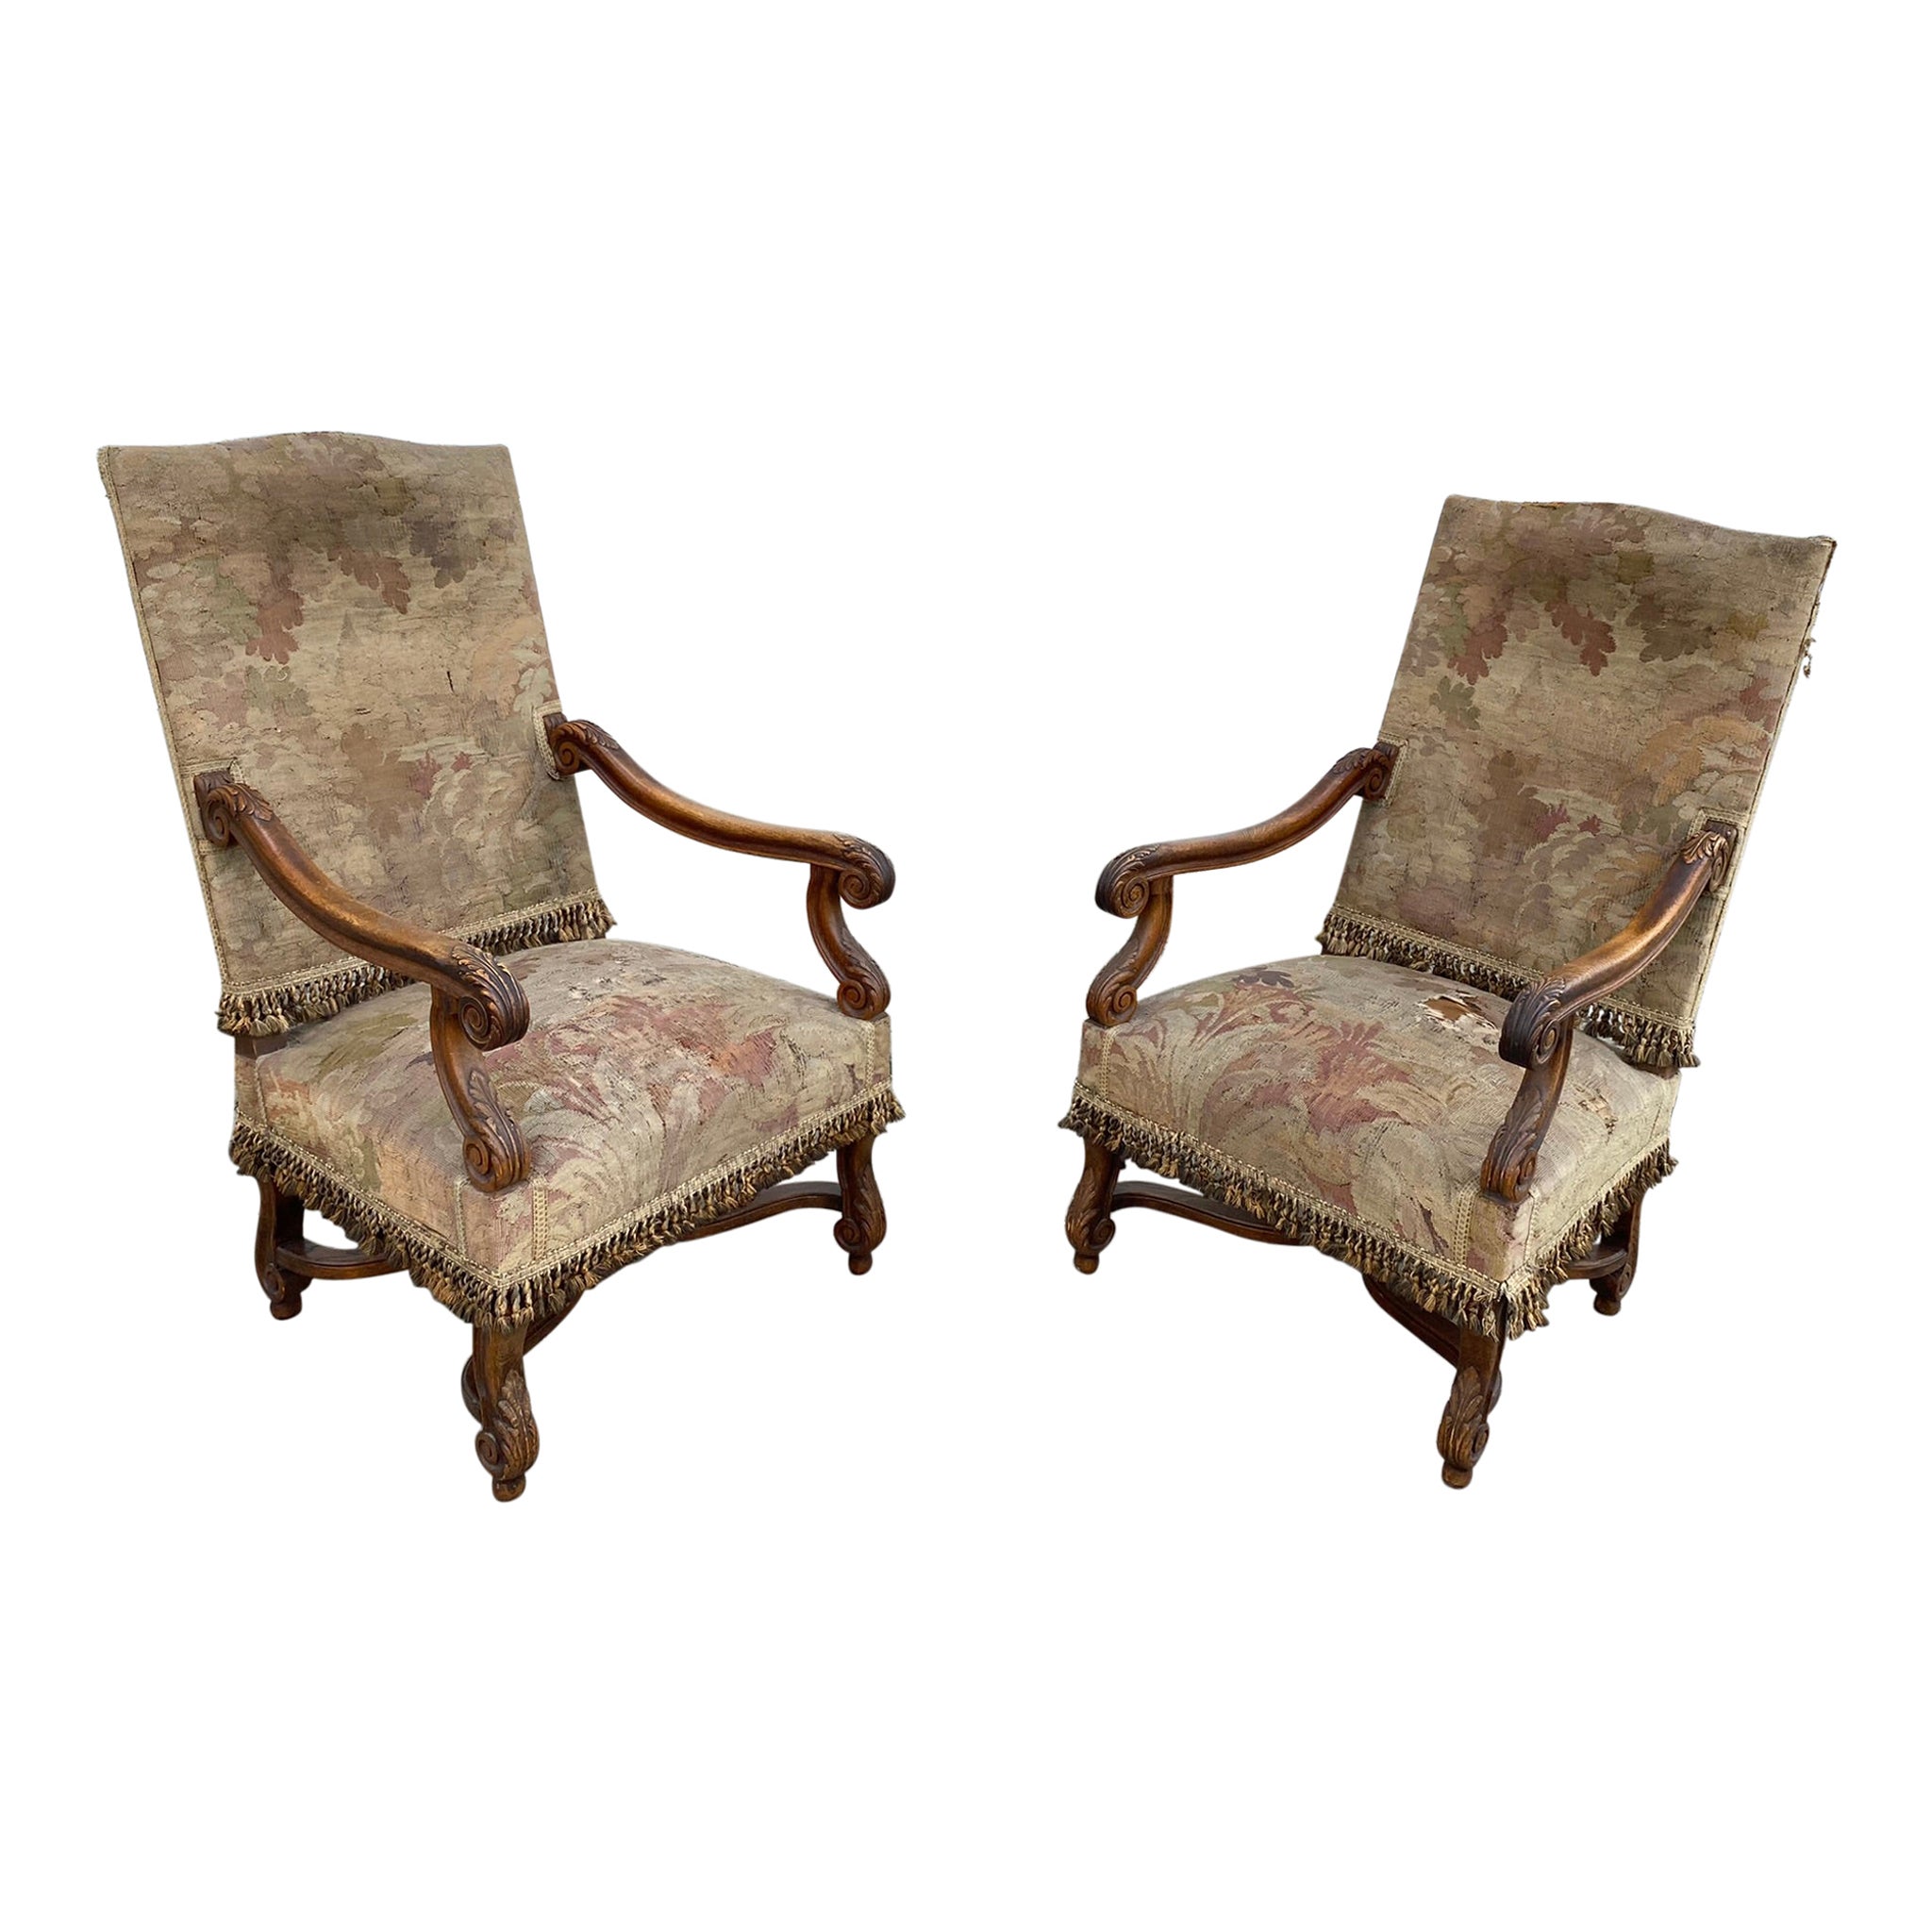 Two Louis XIII Style Armchairs, circa 1900